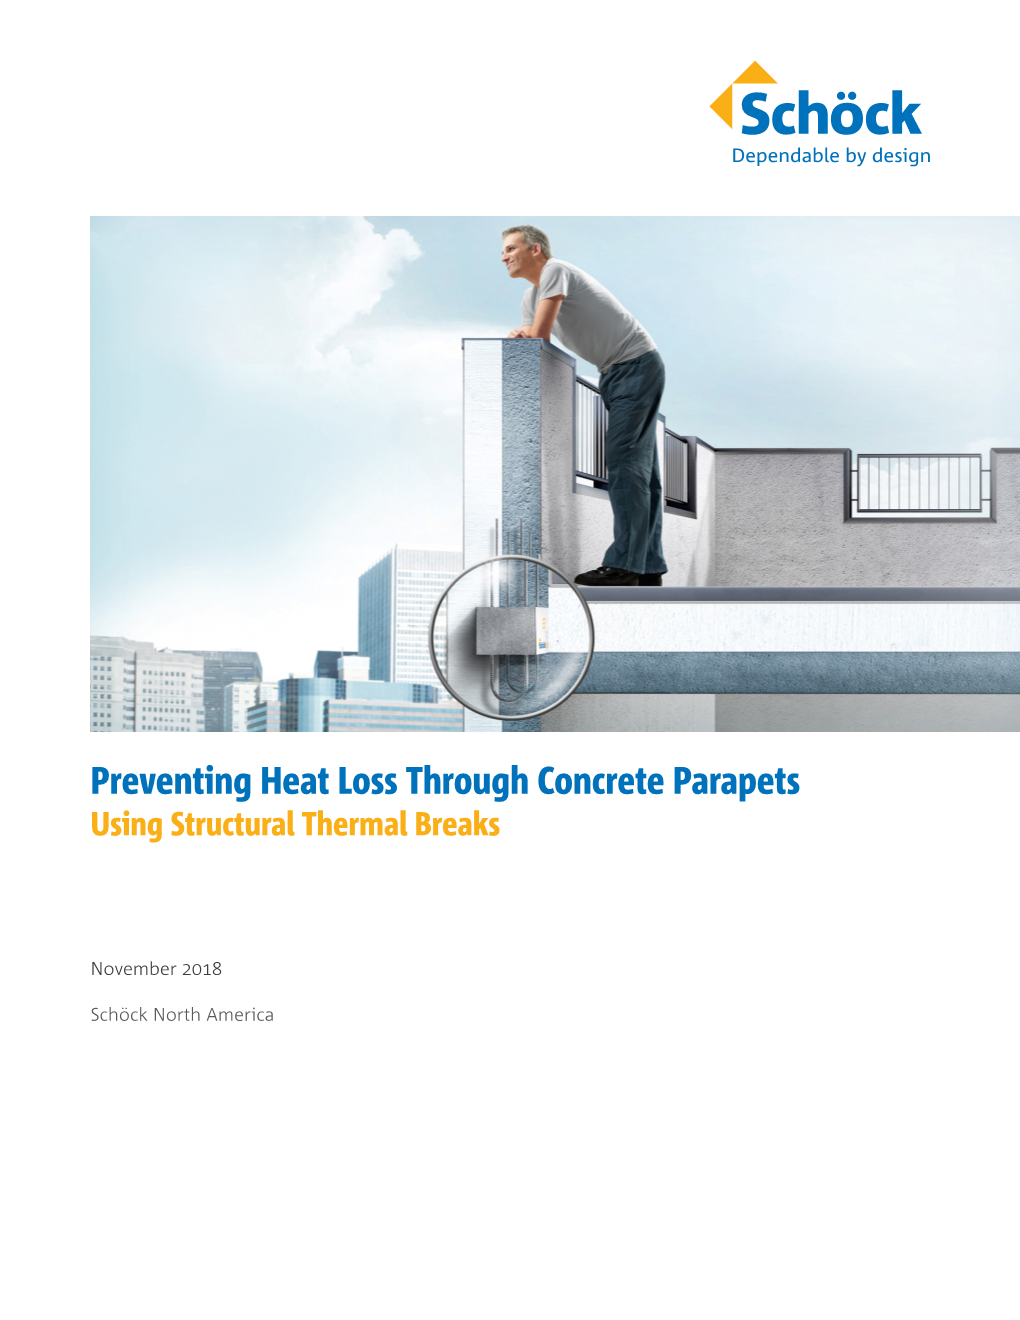 Preventing Heat Loss Through Concrete Parapets Using Structural Thermal Breaks